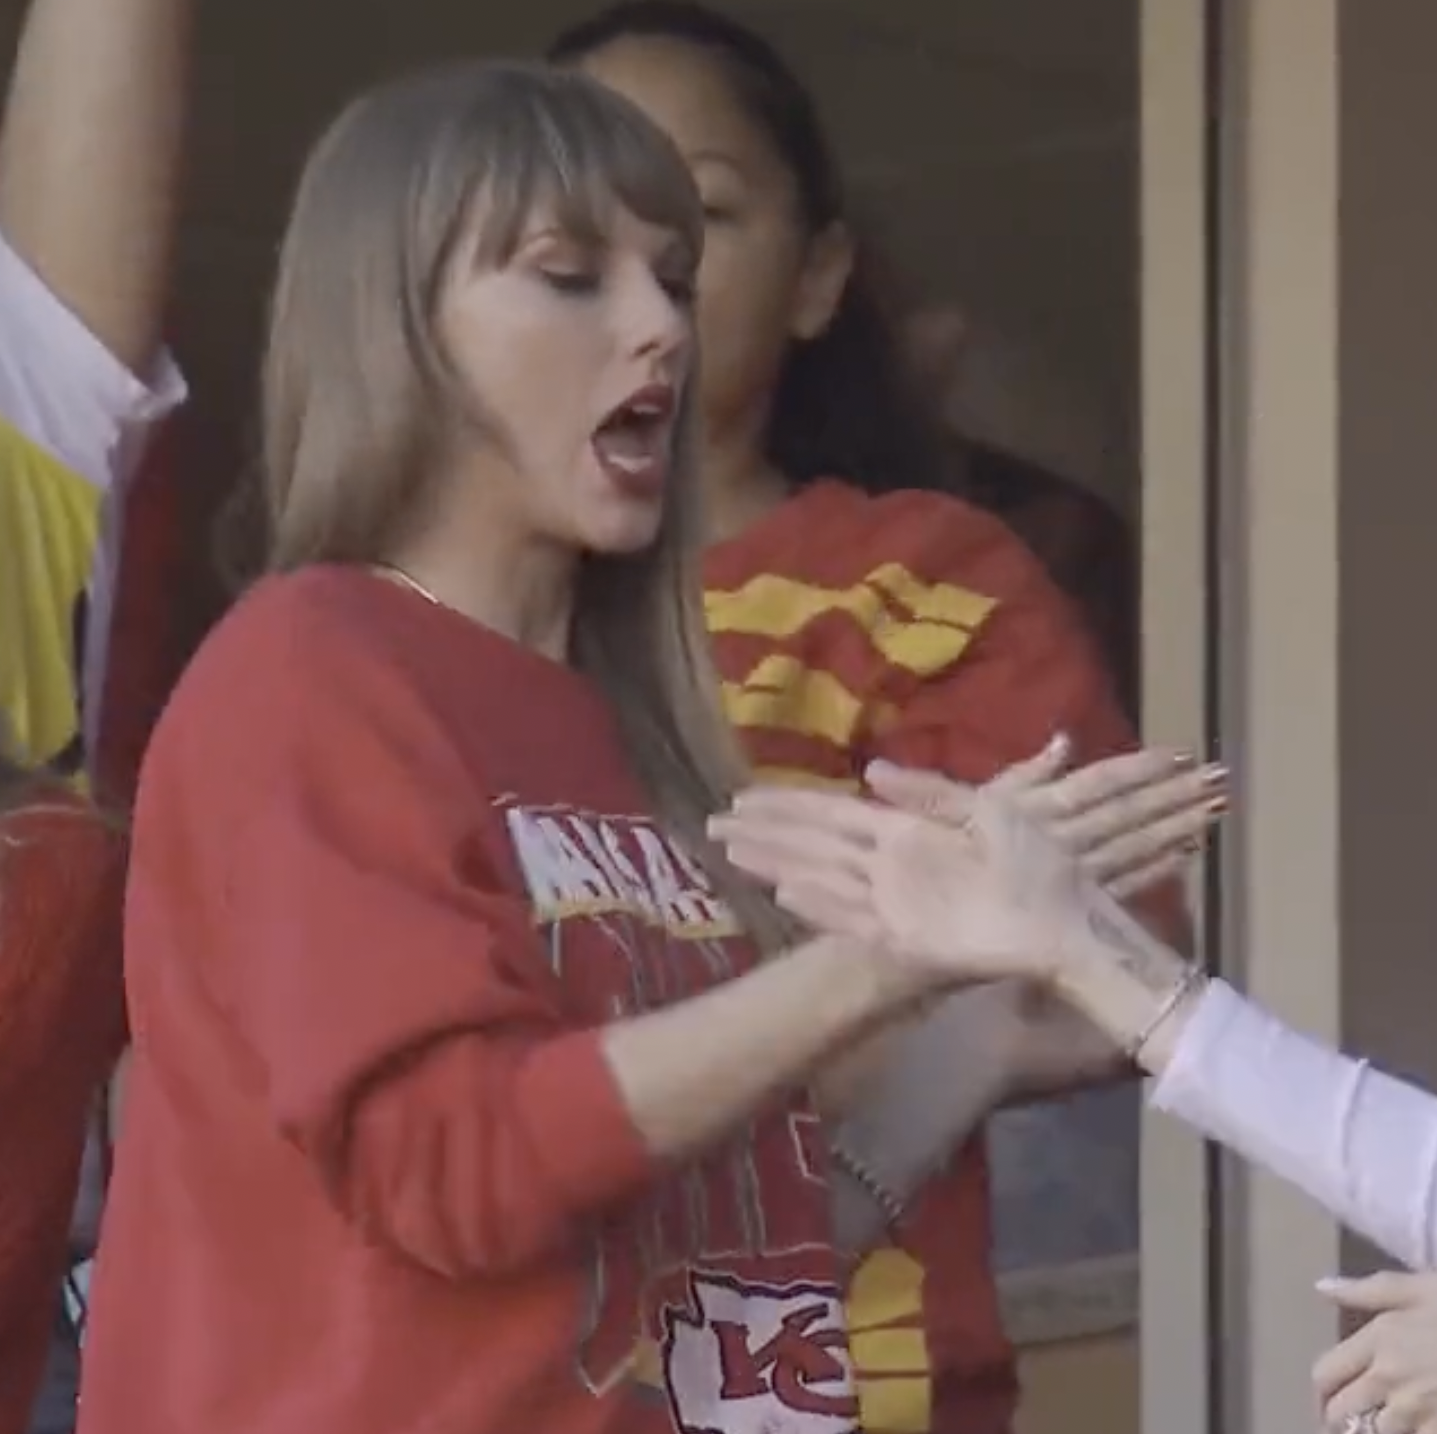 Taylor Swift and Brittany Mahomes Fully Choreographed and Practiced Their Own Handshake